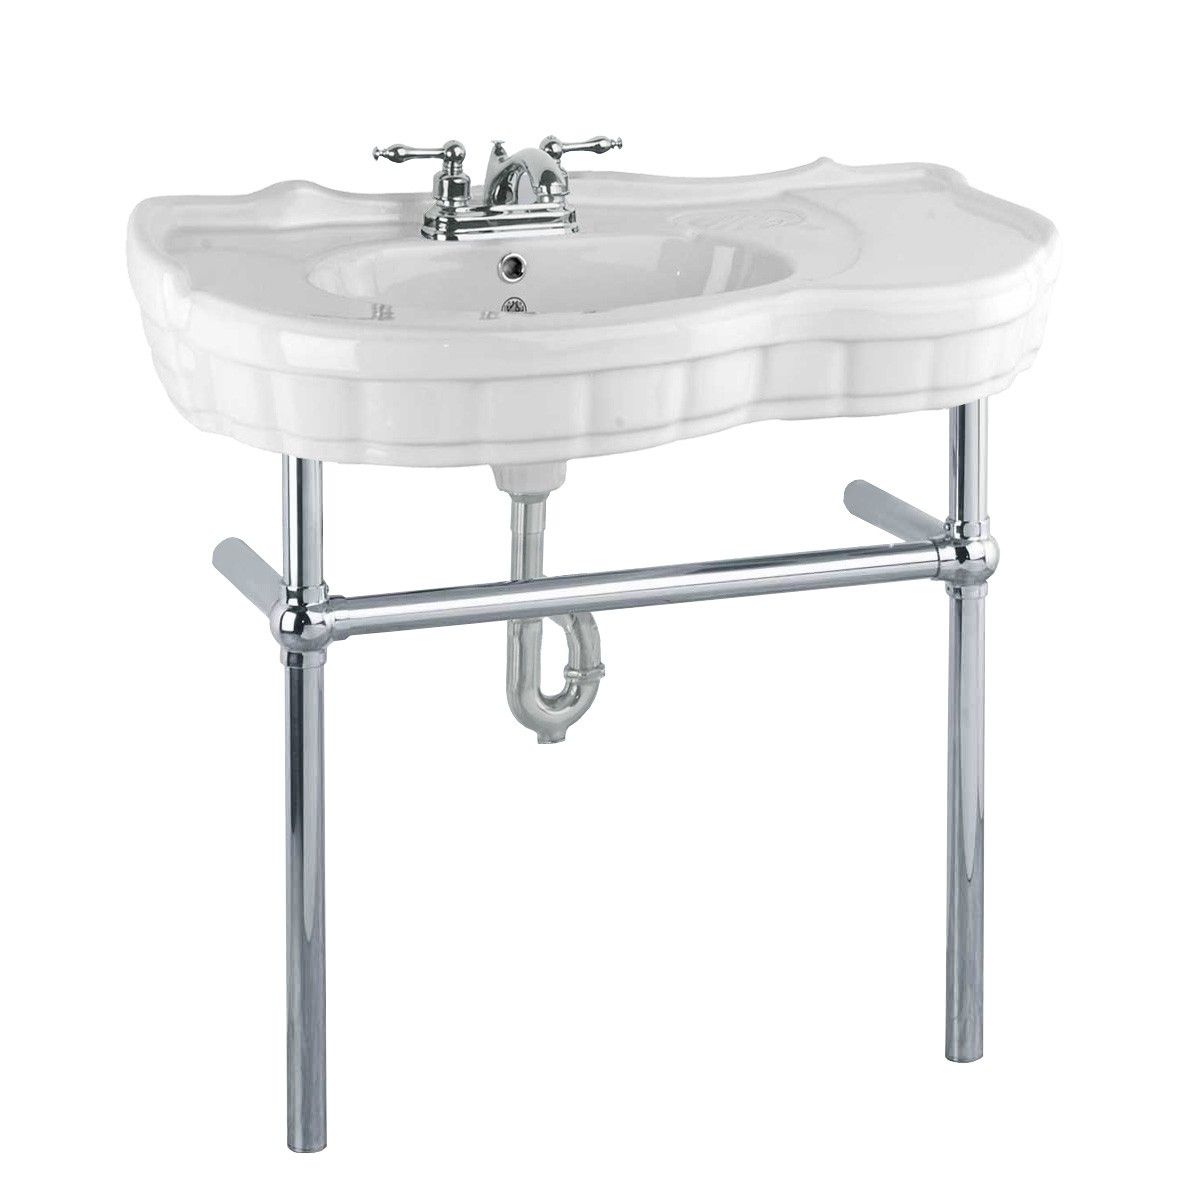 White Console Sink Porcelain Southern Belle With Chrome Bistro Legs Within White Porcelain And Chrome Wall Mirrors (View 13 of 15)